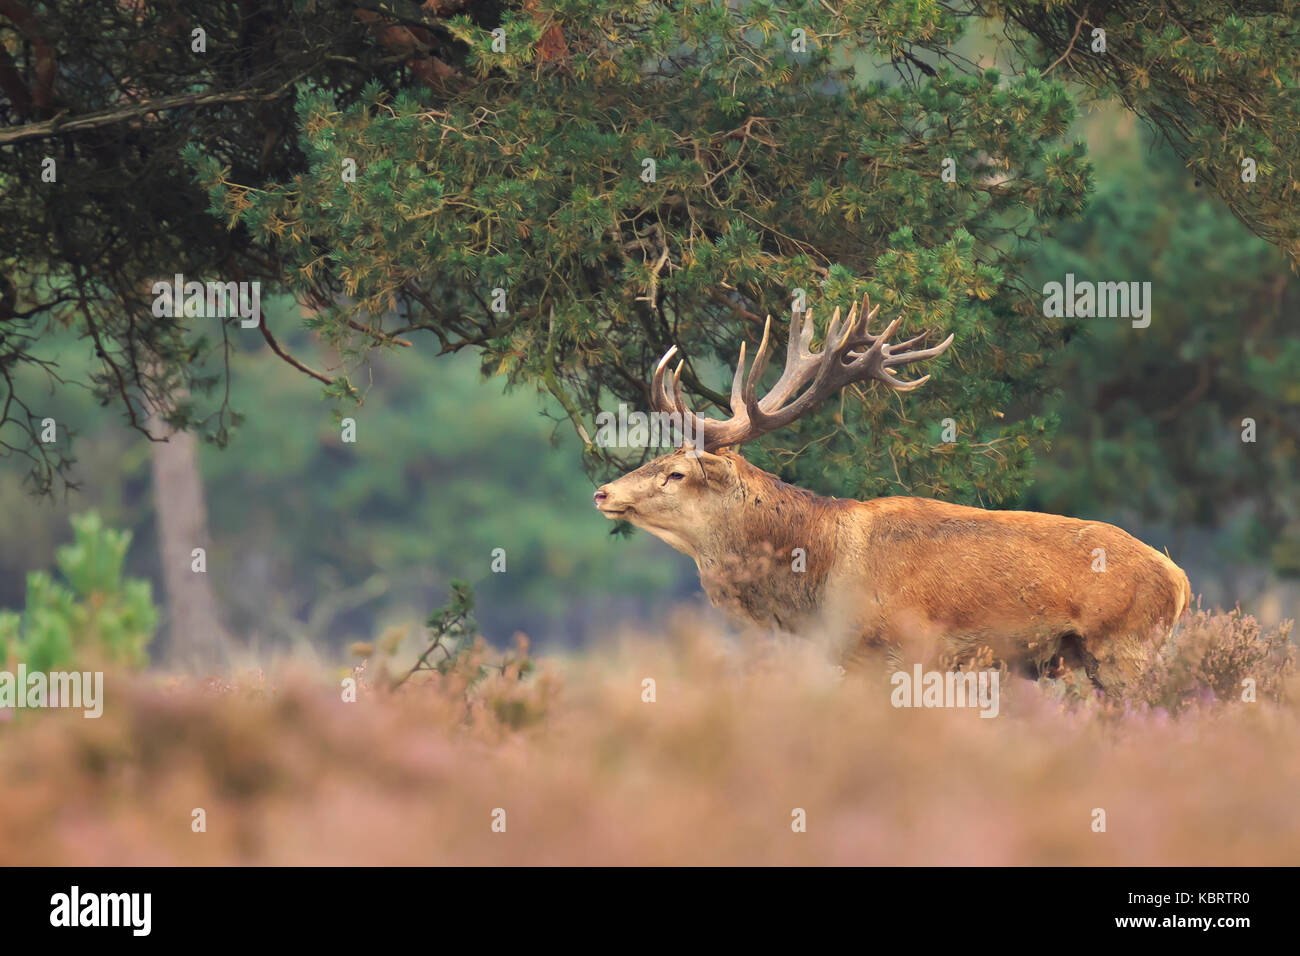 Red deer Cervus elaphus stag with big antlers during rutting season in heathland with a dark forest on the background. Stock Photo